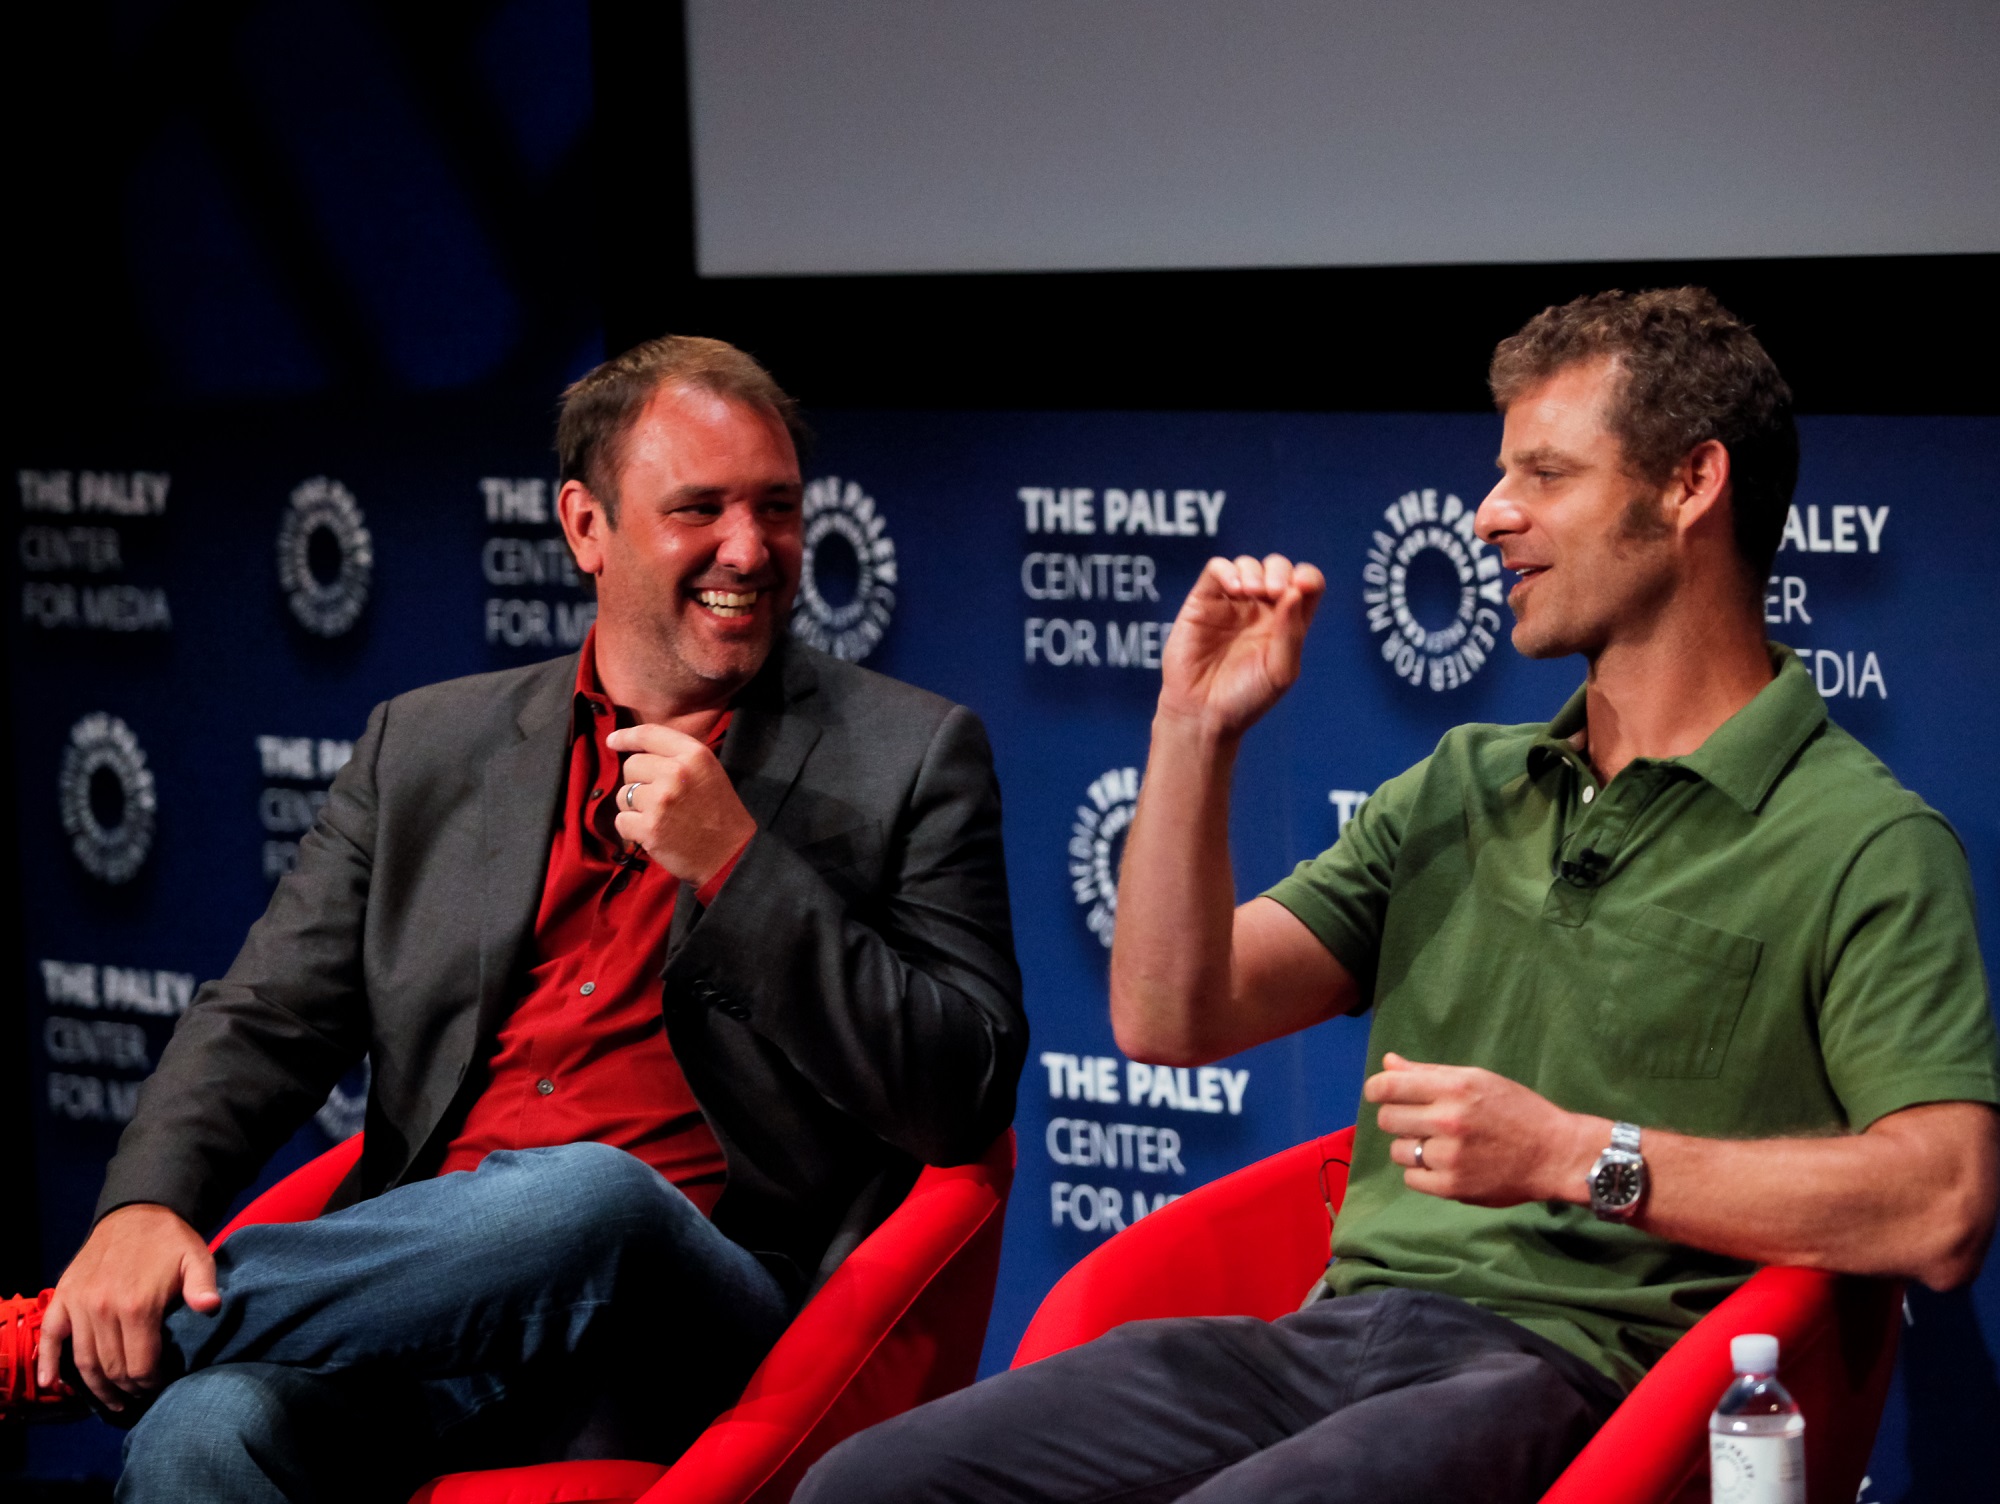 Trey Parker and Matt Stone discuss South Park at the Paley Center